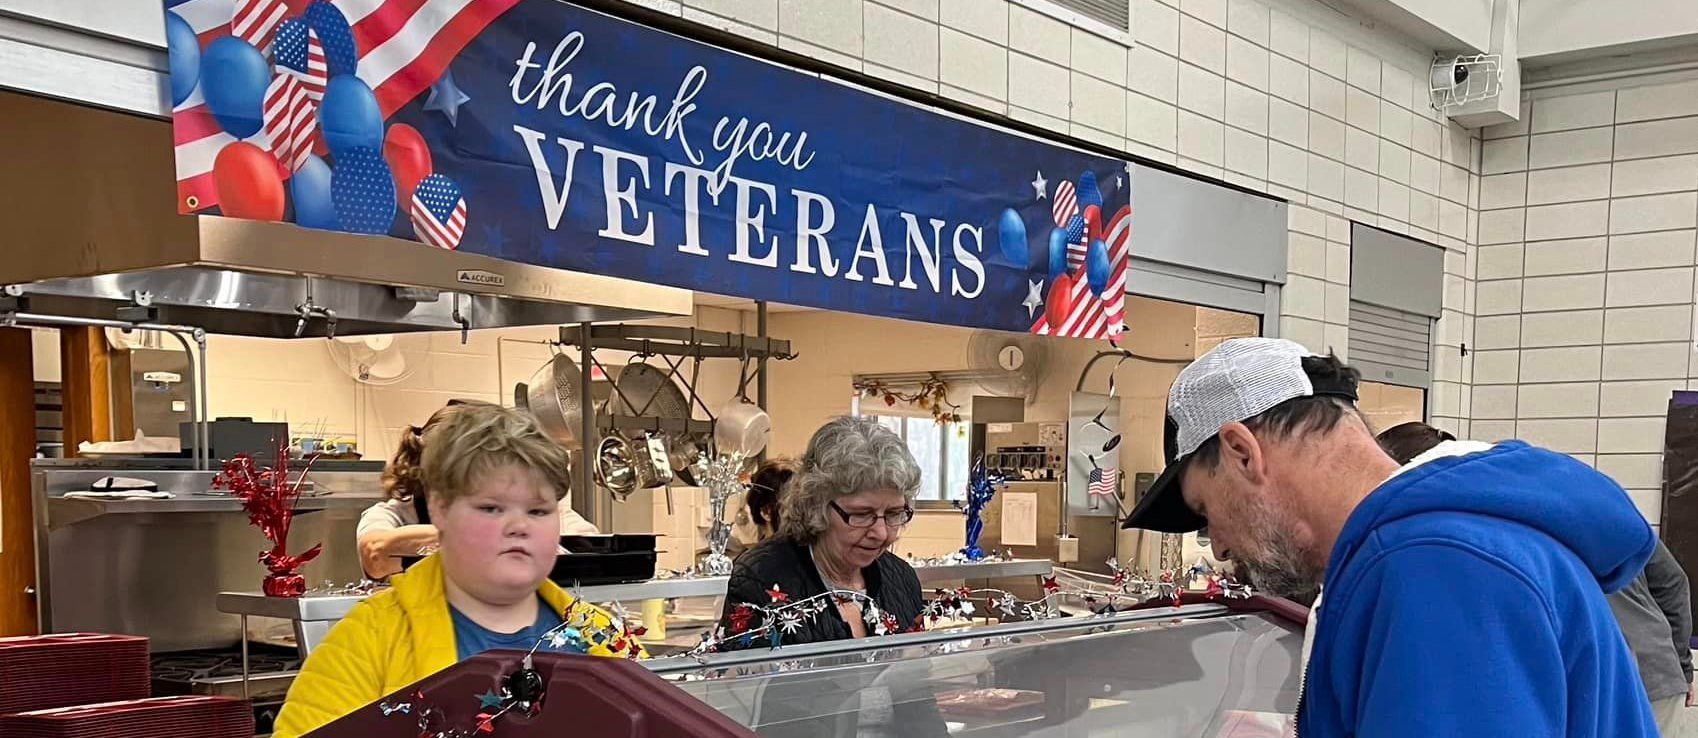 Veterans  and students get fill trays in the lunch line under a banner saying, "Thank You Veterans"